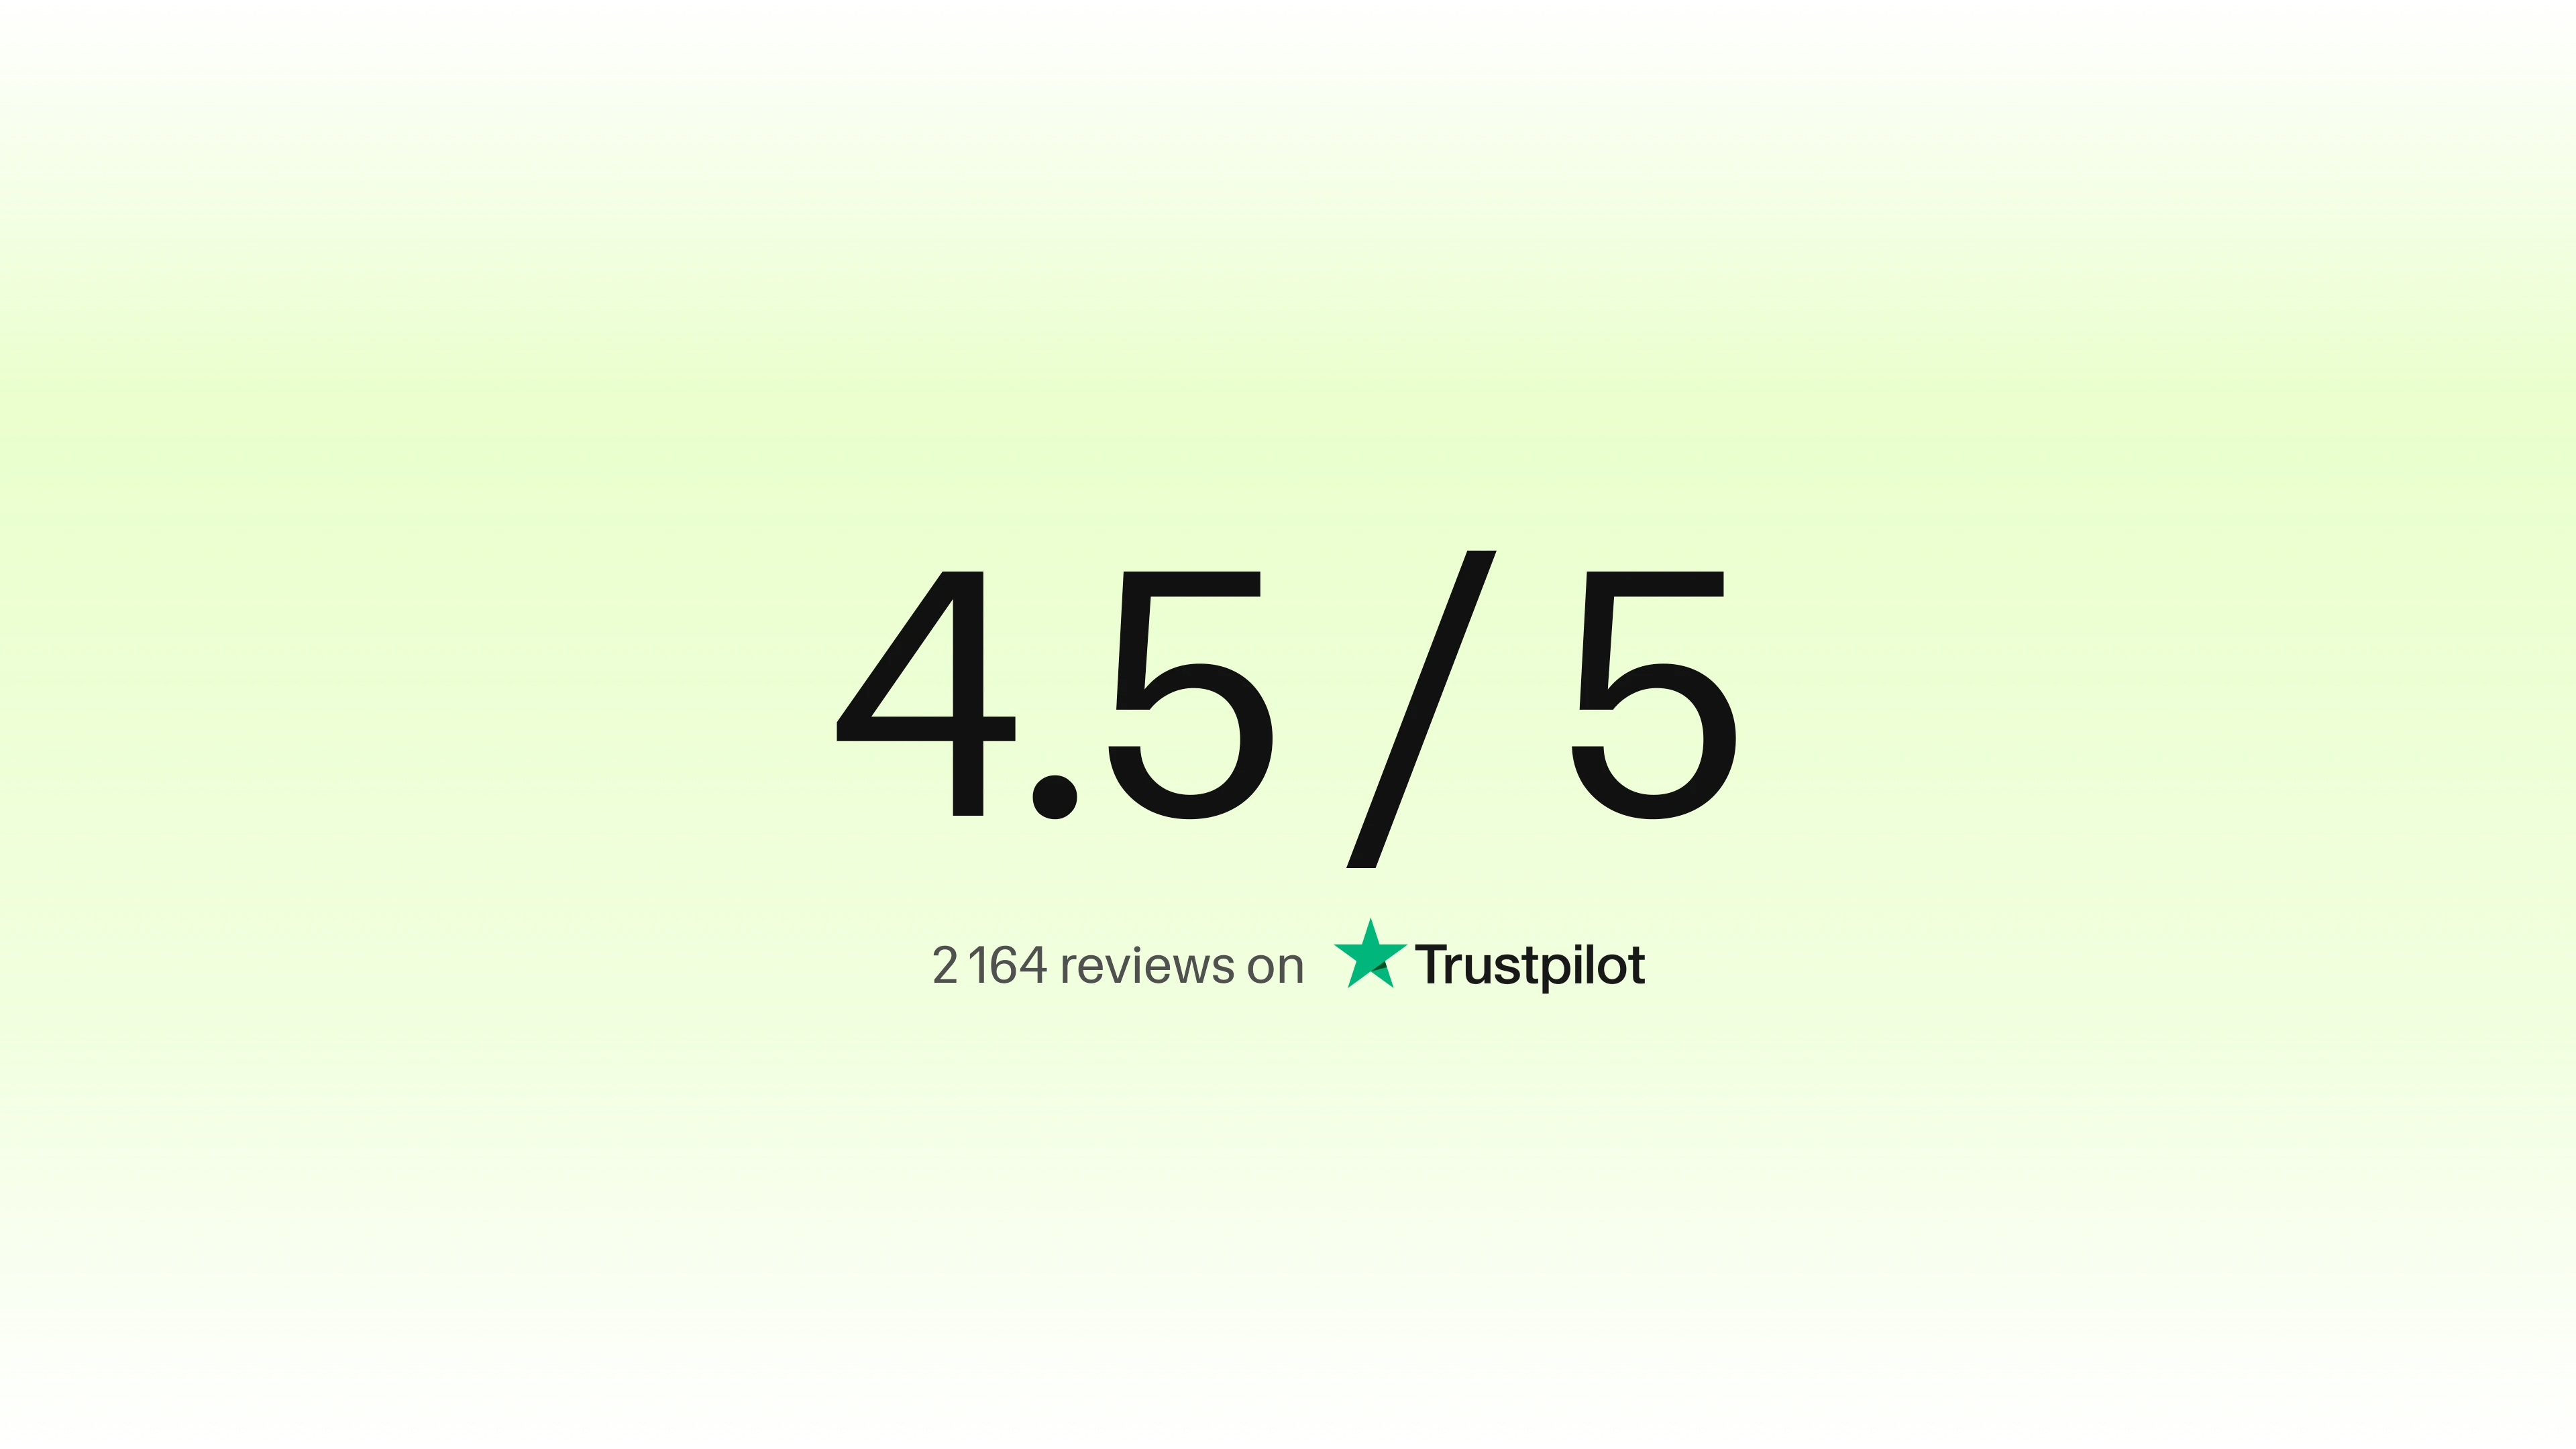 Hedvigs rating on Trustpilot.